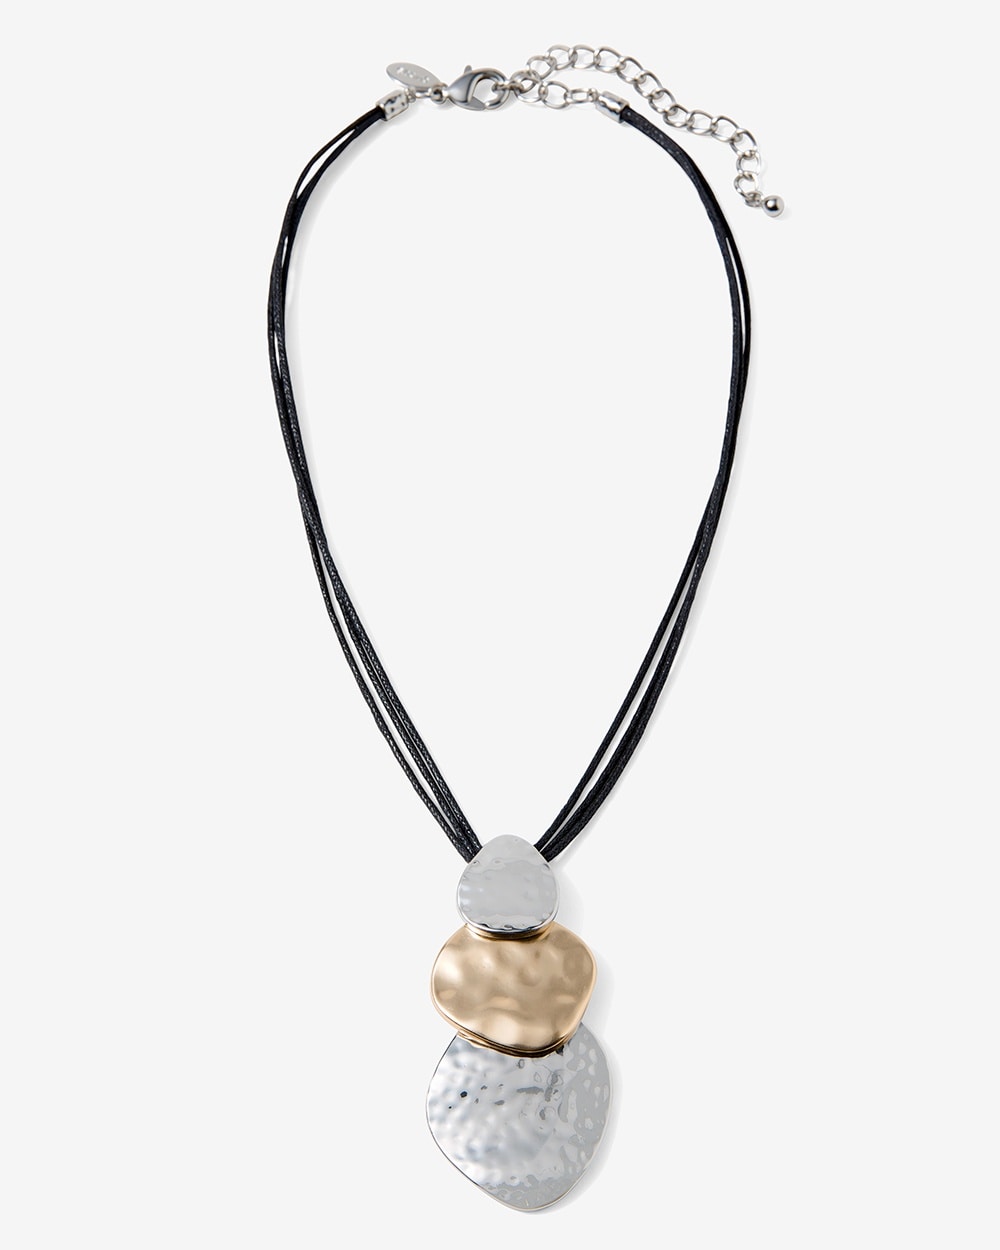 Organic Layers Two-Toned Pendant Necklace